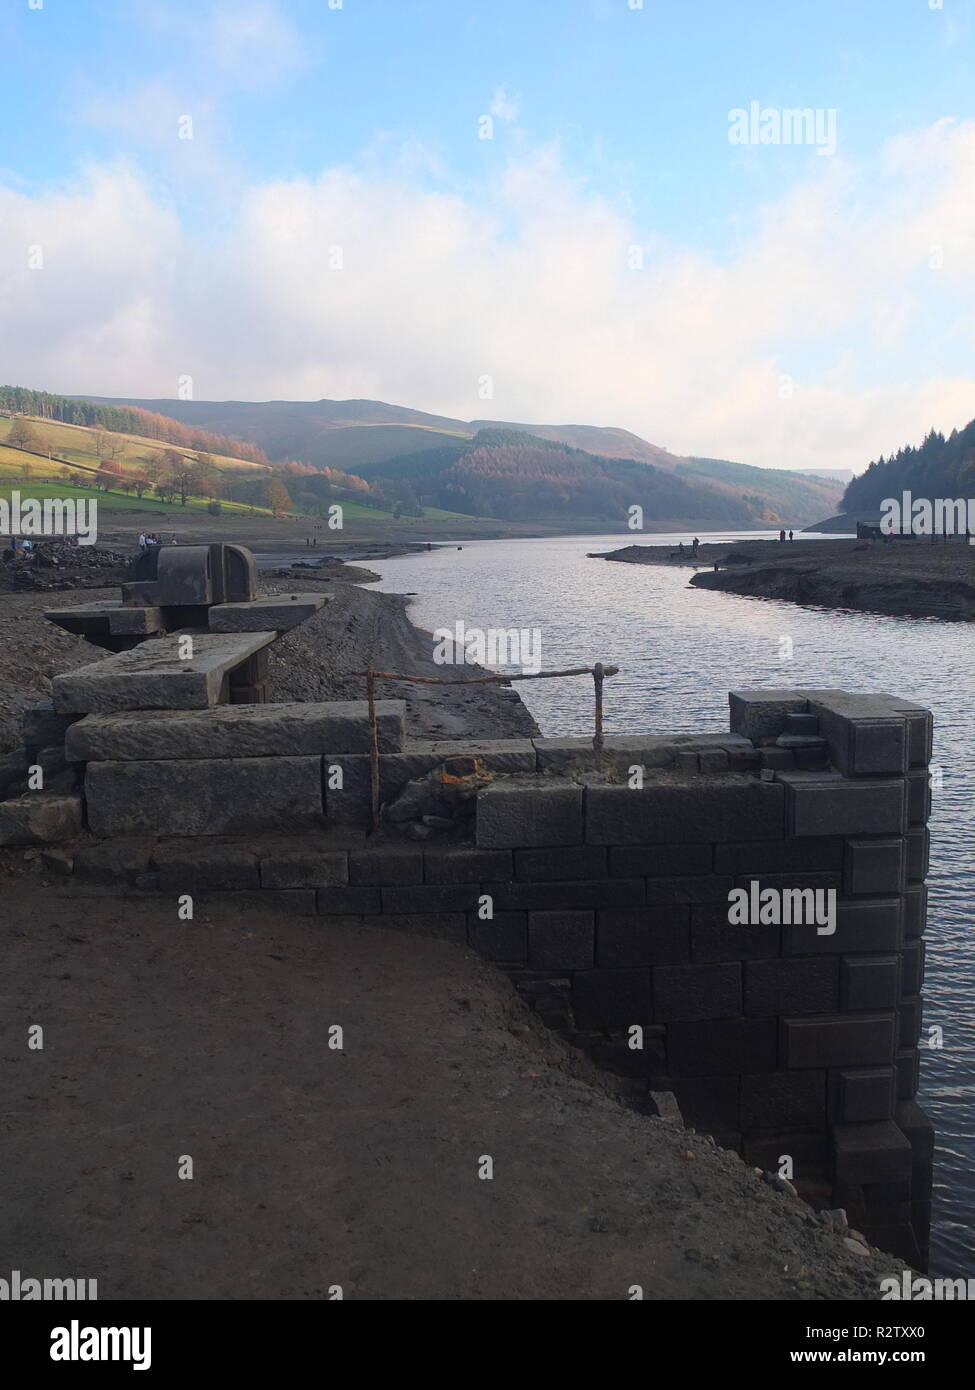 The exposed ruins of the demolished Derwent Hall normally on bed of Ladybower Reservoir, revealed by low water following 2018 heatwave Stock Photo